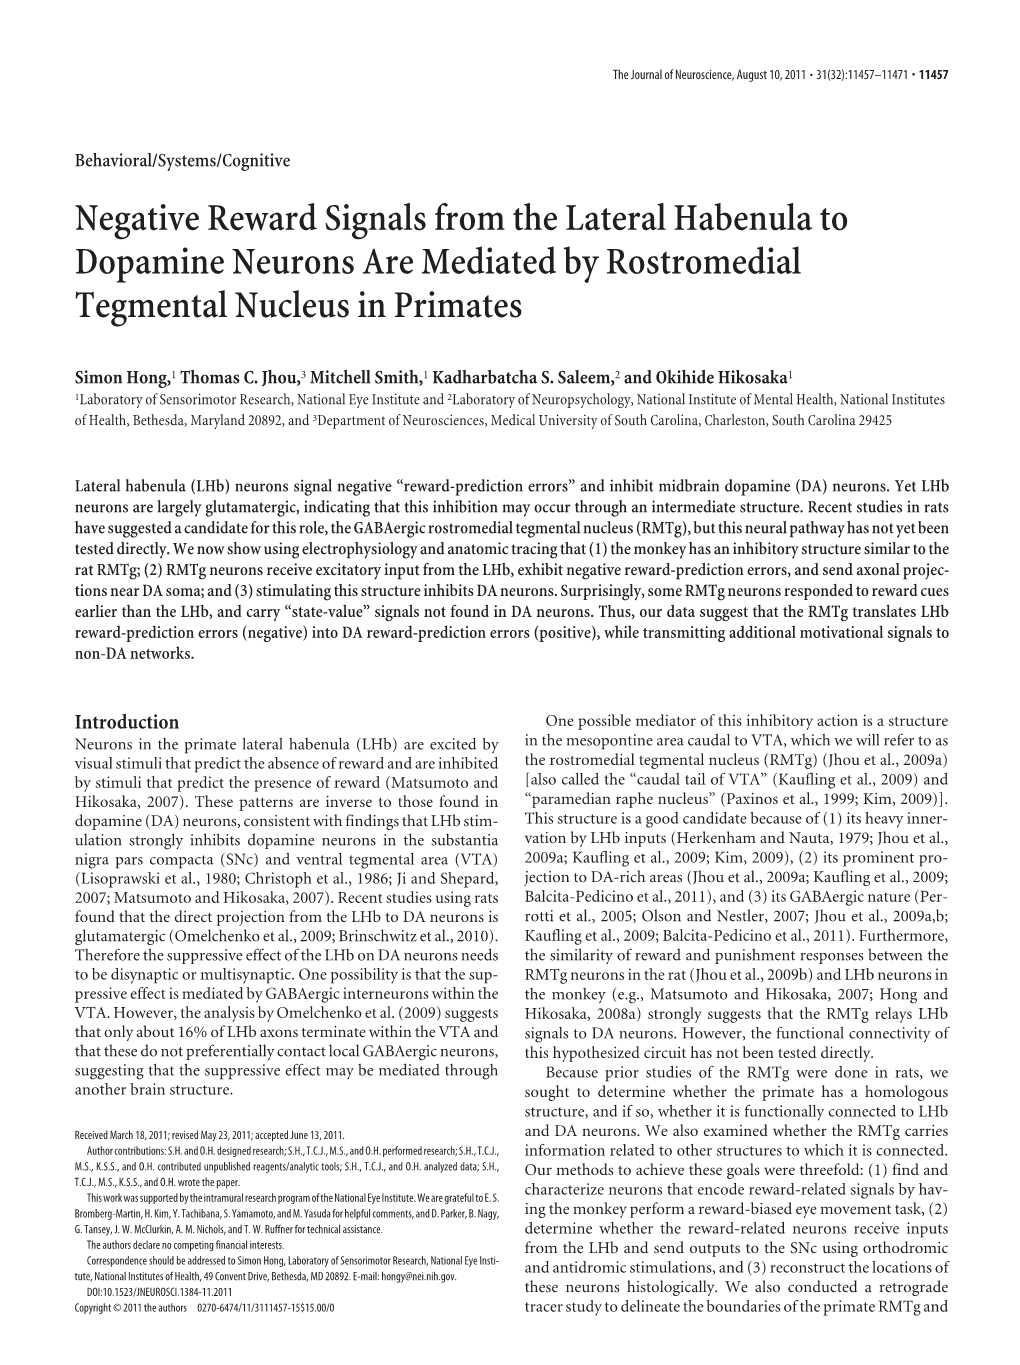 Negative Reward Signals from the Lateral Habenula to Dopamine Neurons Are Mediated by Rostromedial Tegmental Nucleus in Primates